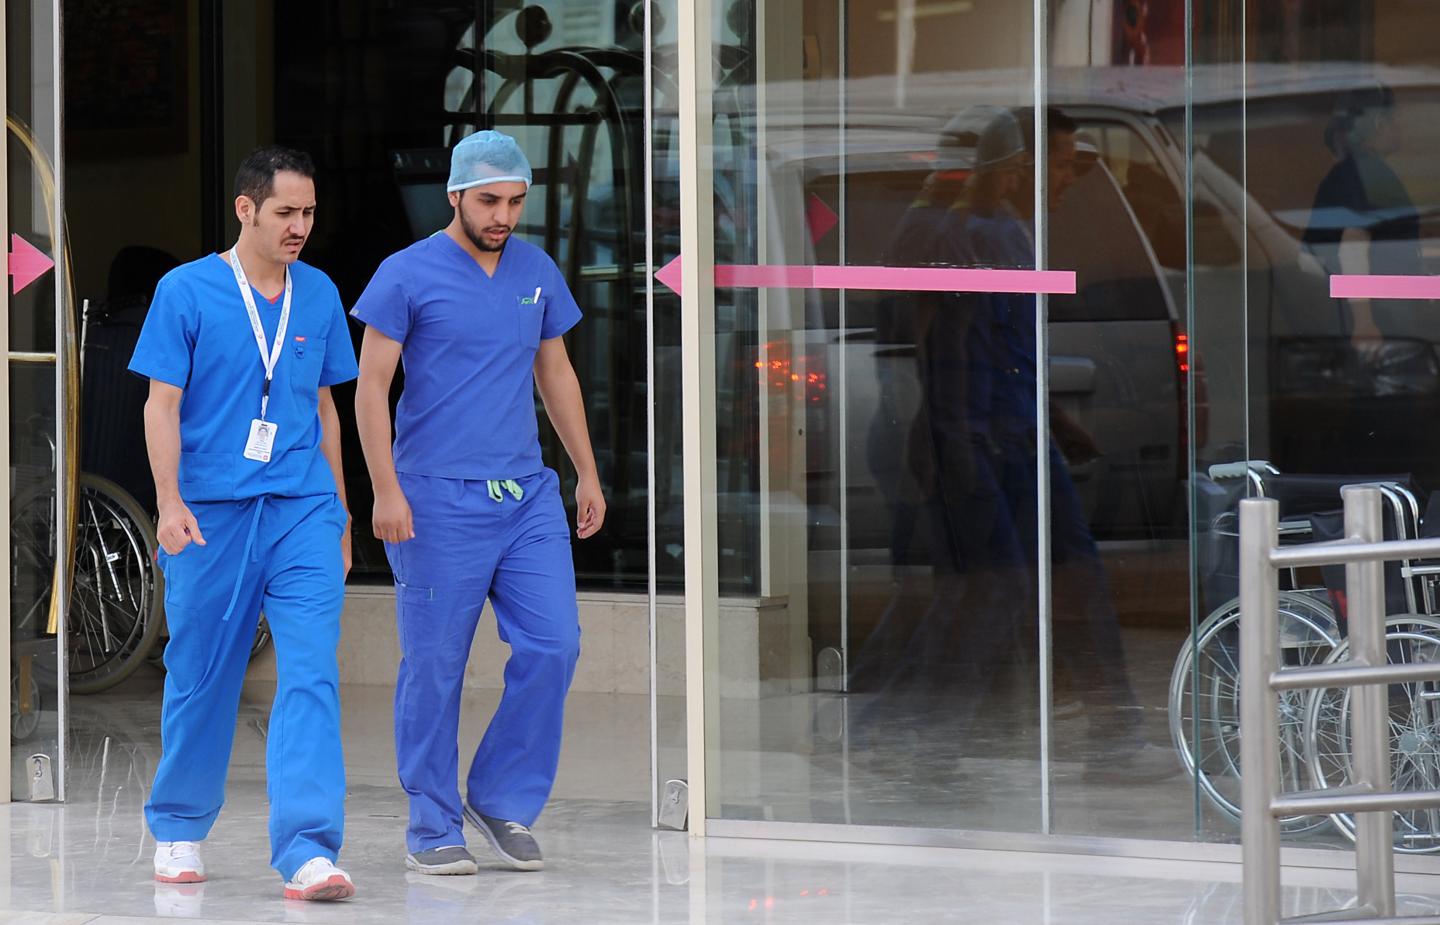 SAUDI ARABIA: MAN SHOOTS DOCTOR FOR ASSISTING WIFE’S LABOR